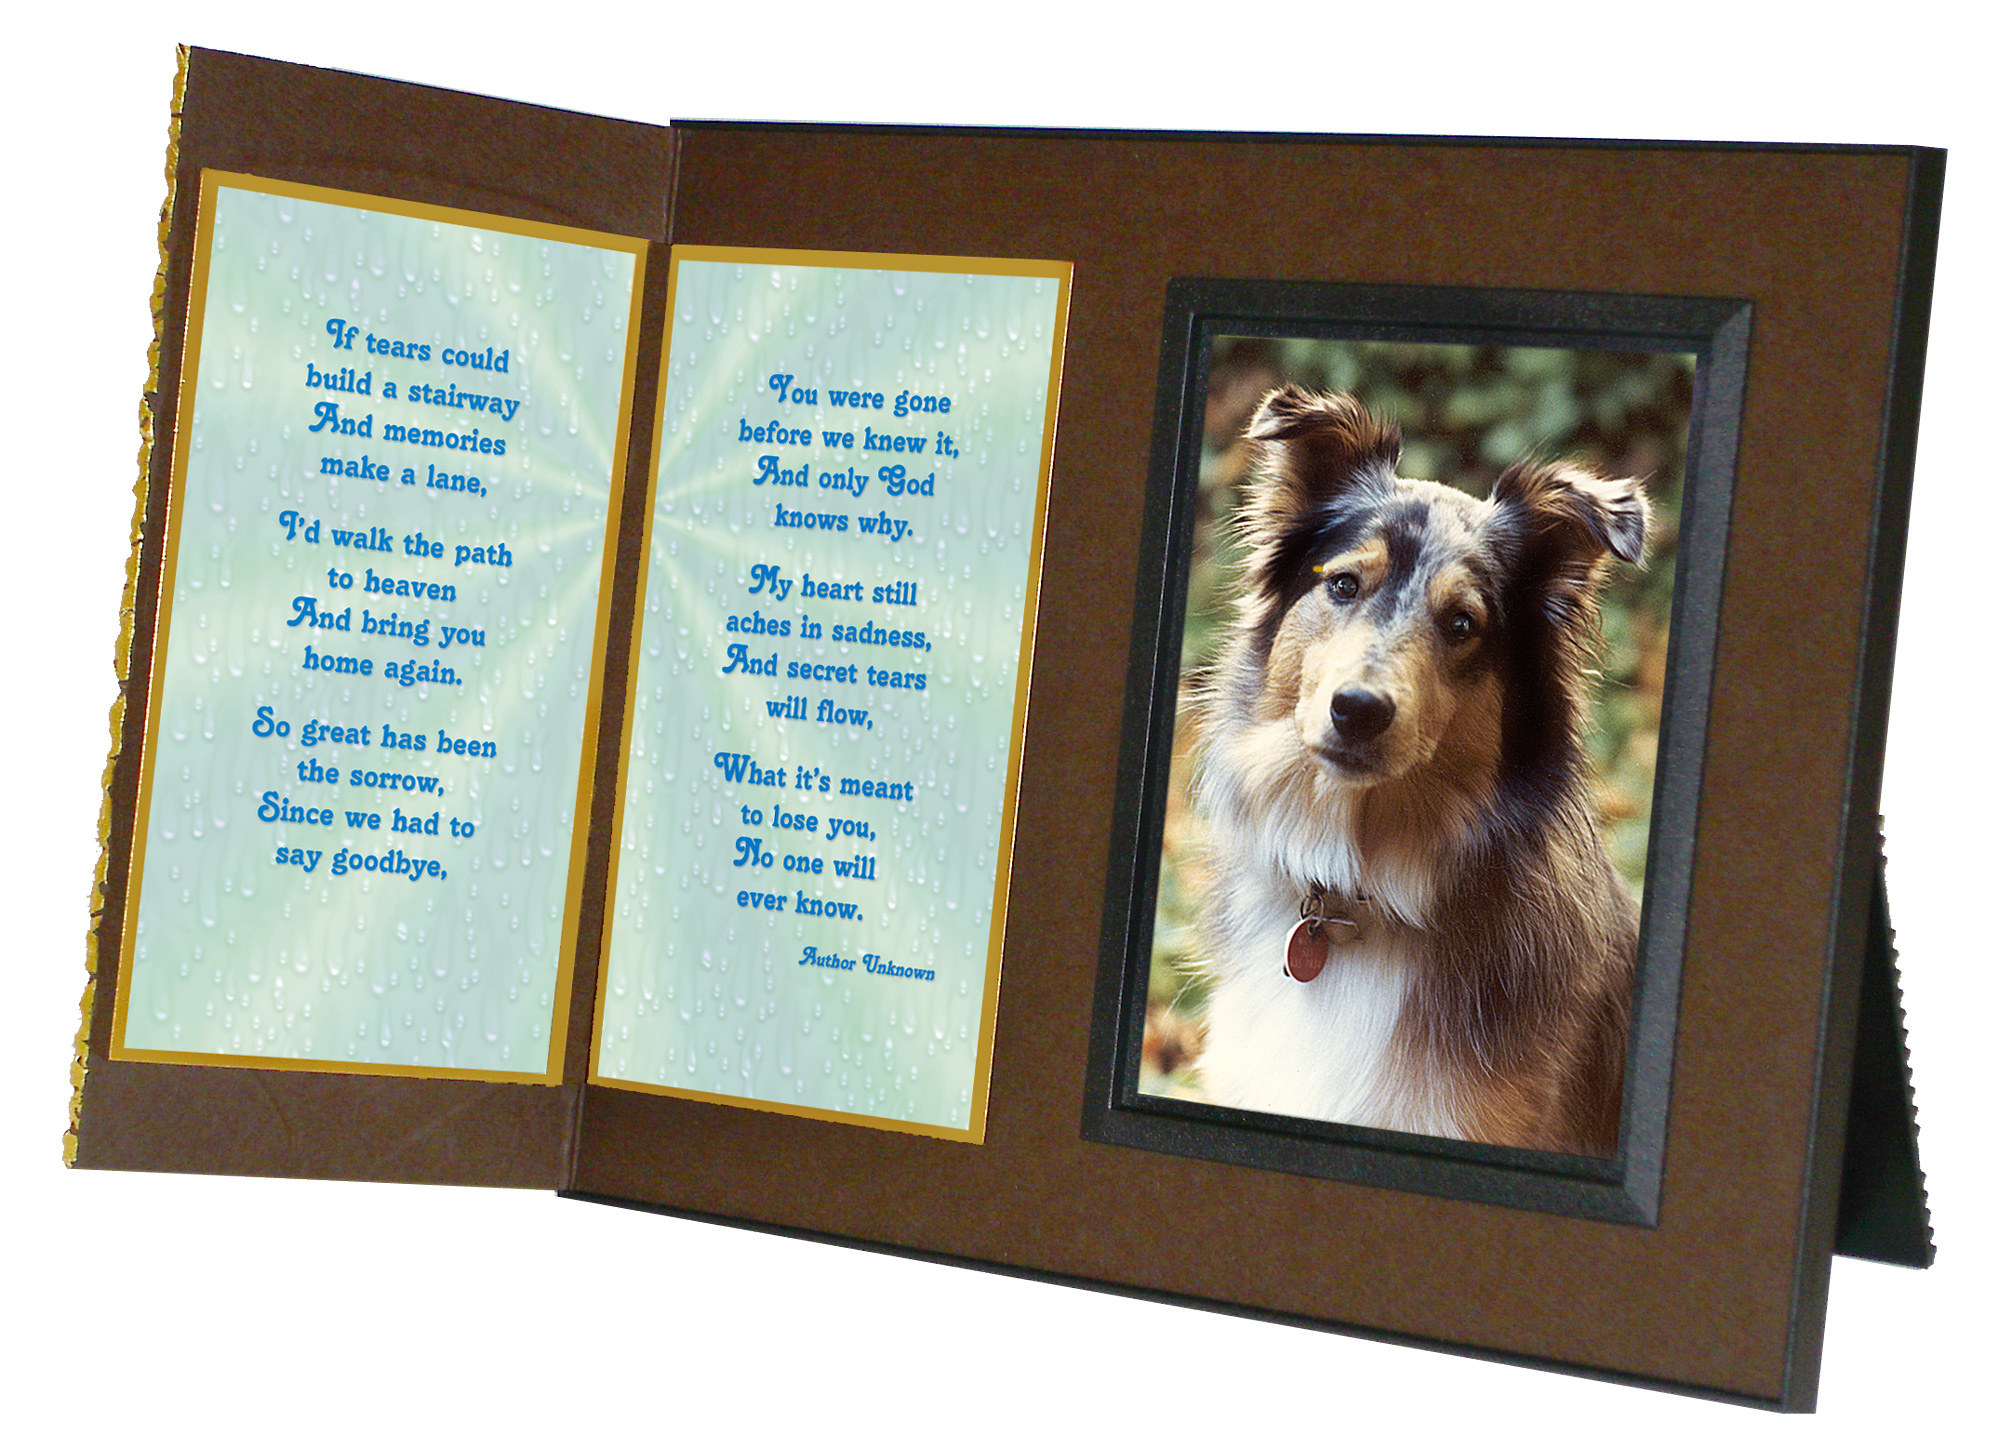 If Tears Could Build a Stairway Pet Loss Sympathy Gift Brown w/ Foil 